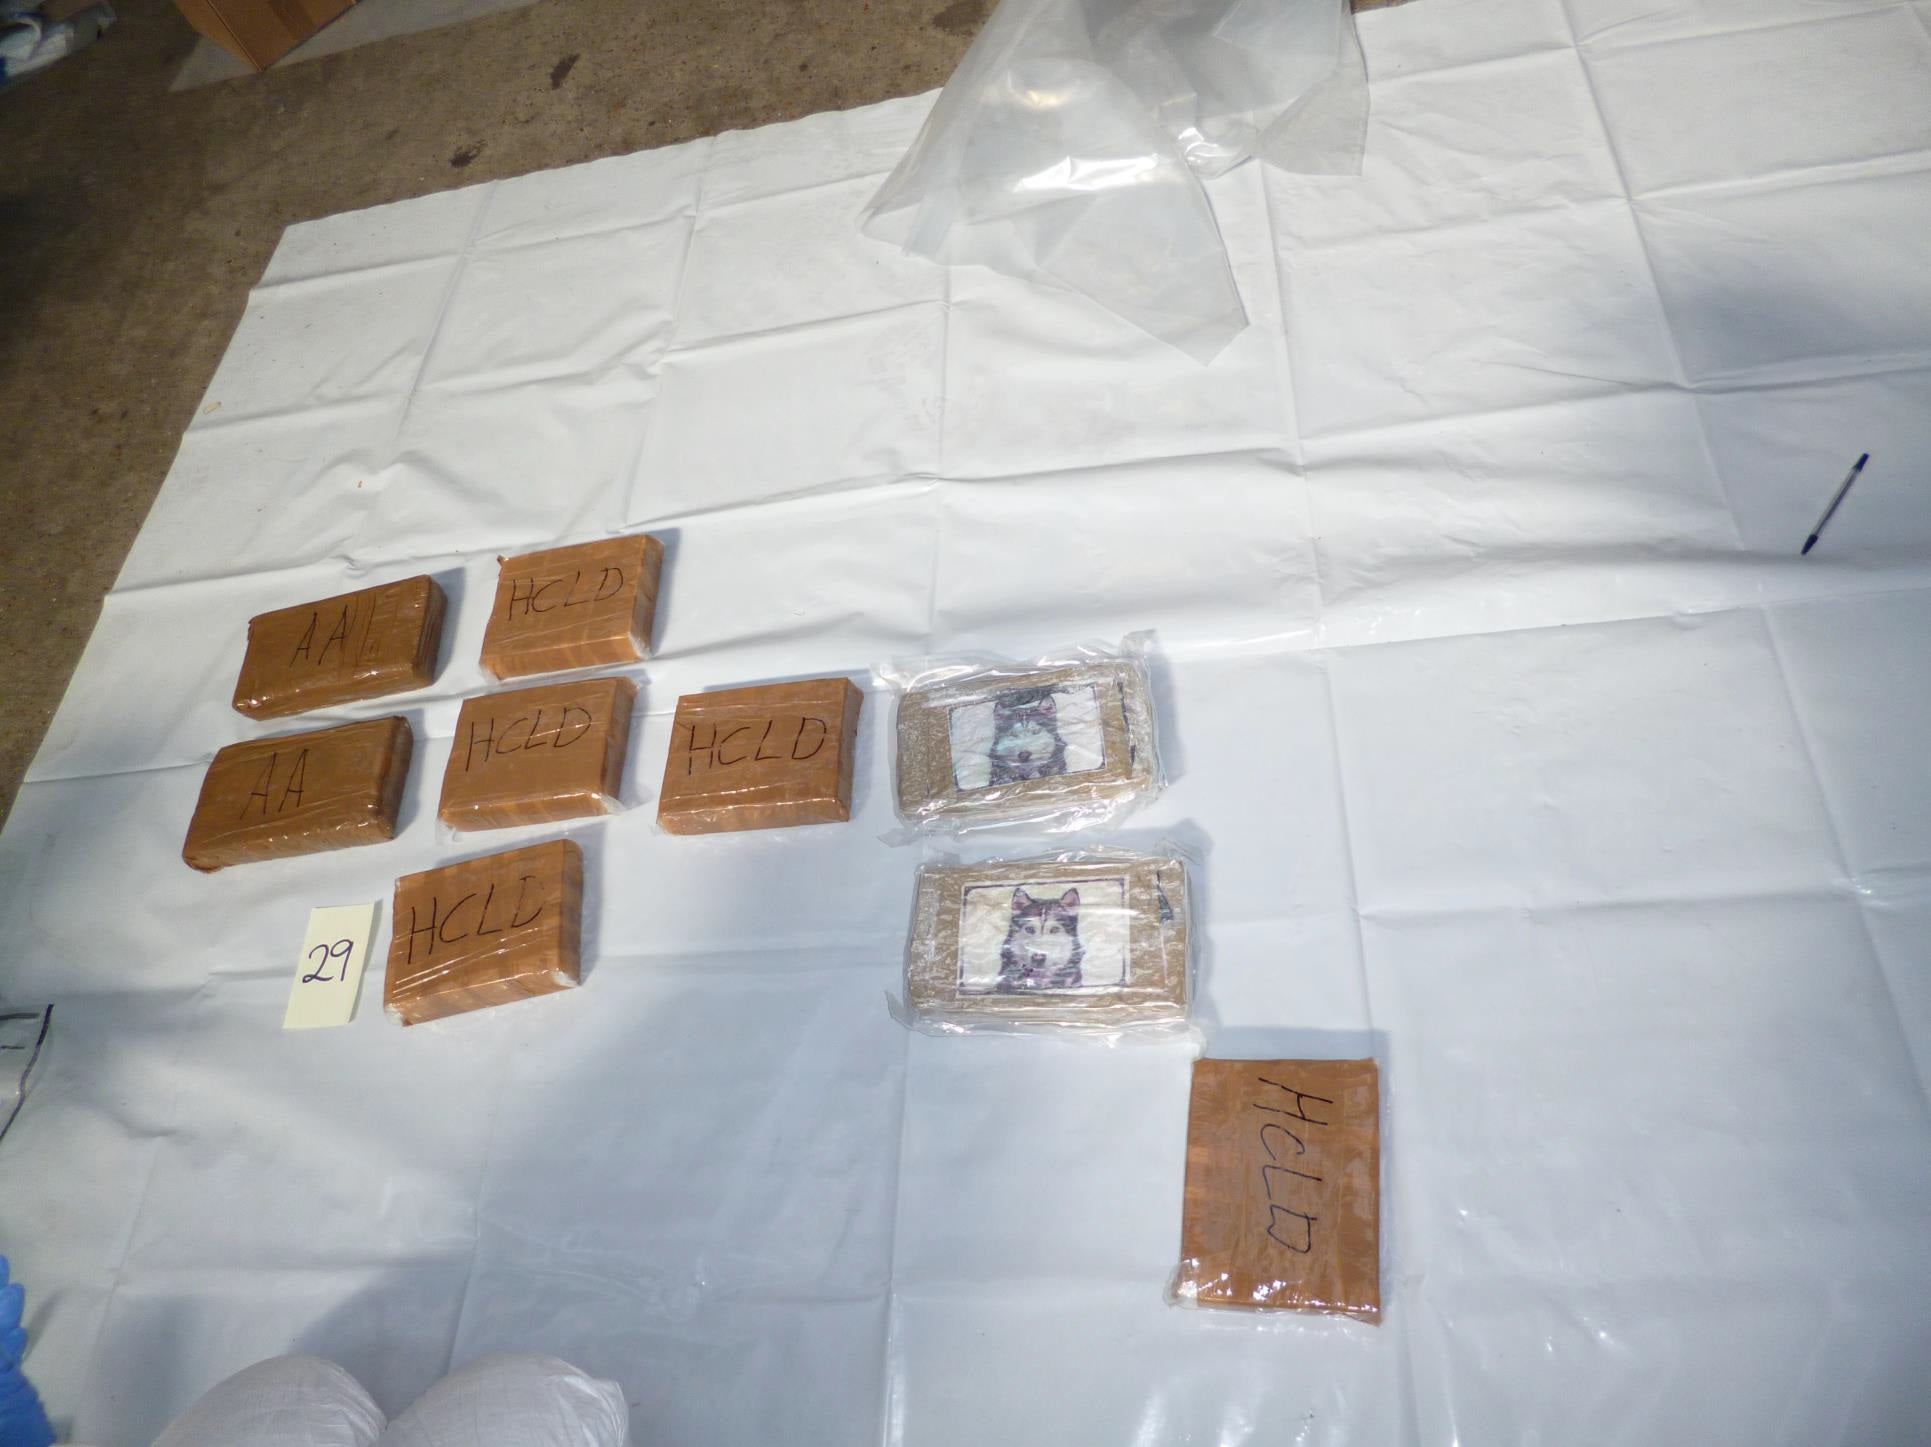 (PA/ NCA) Law enforcement found 183kg of cocaine and heroin within packages inside the van